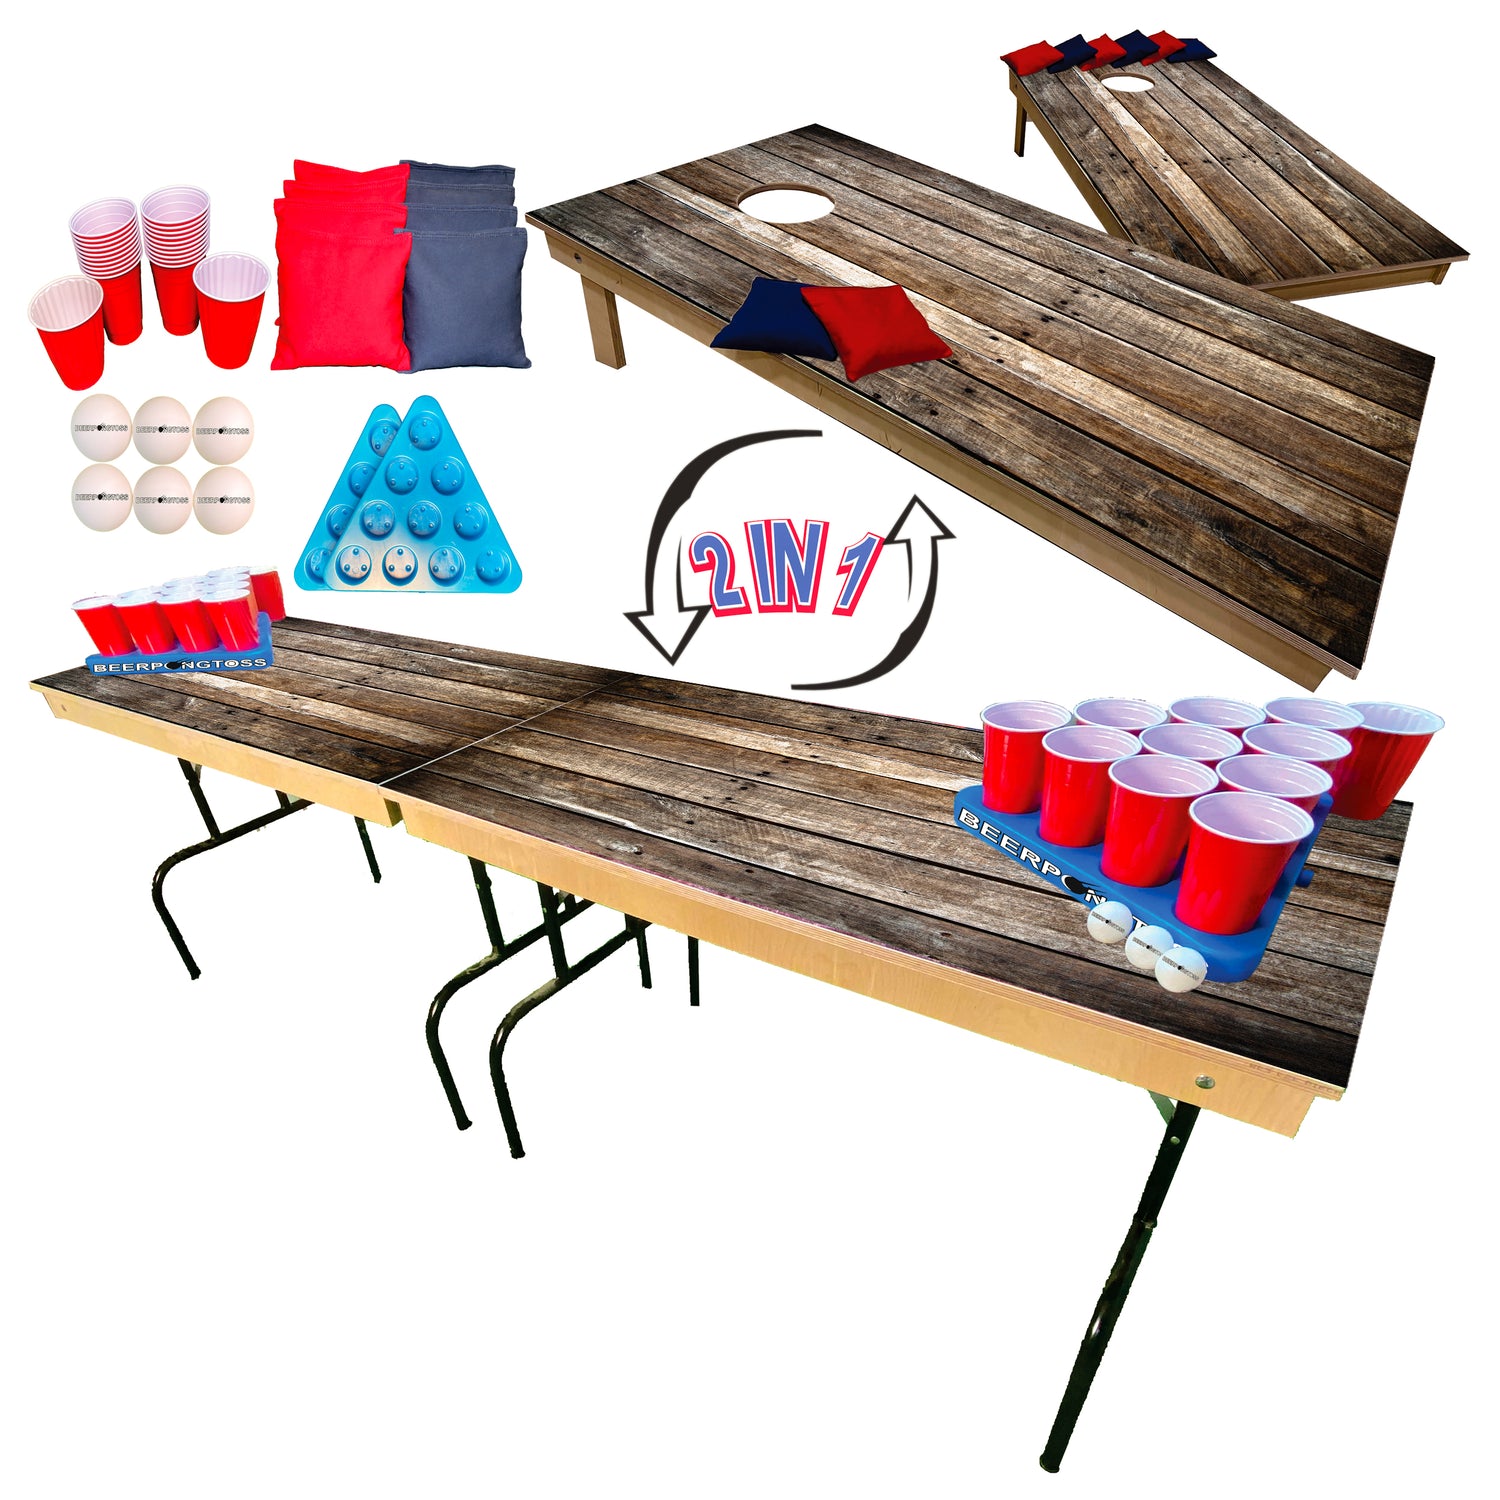 2-in-1 Cornhole & Beer Pong Invention